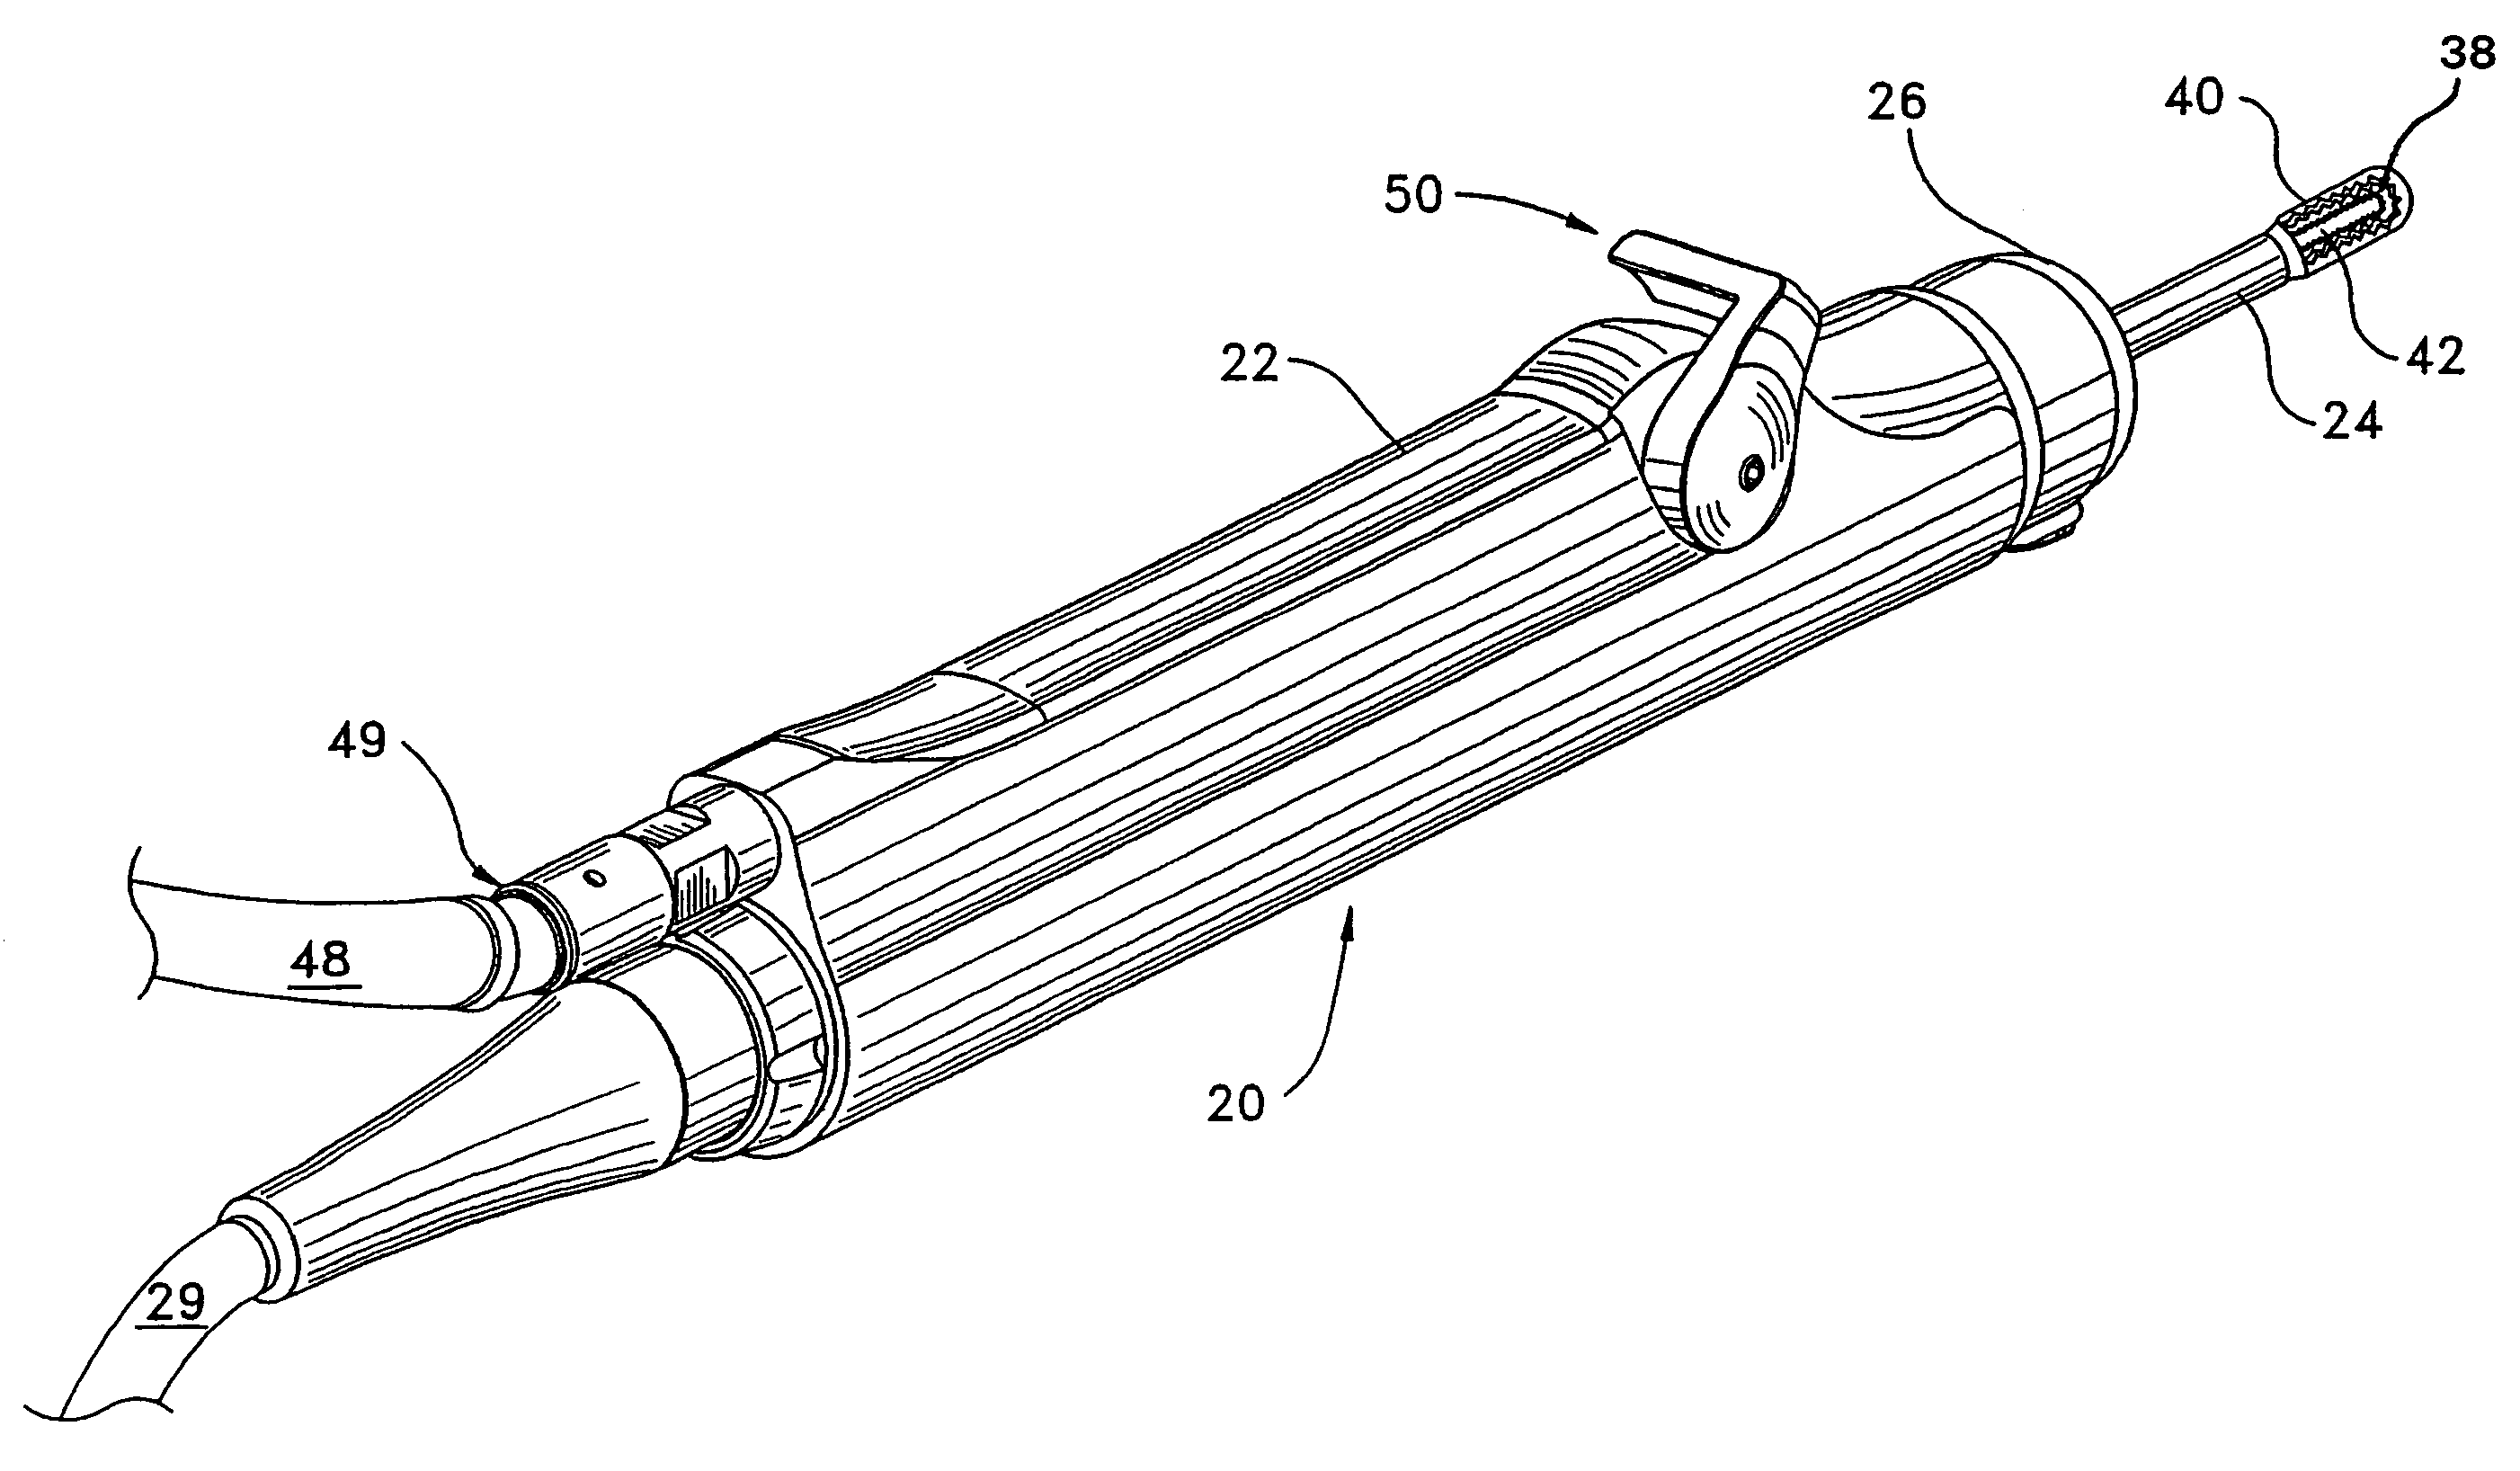 Powered surgical handpiece with precision suction control